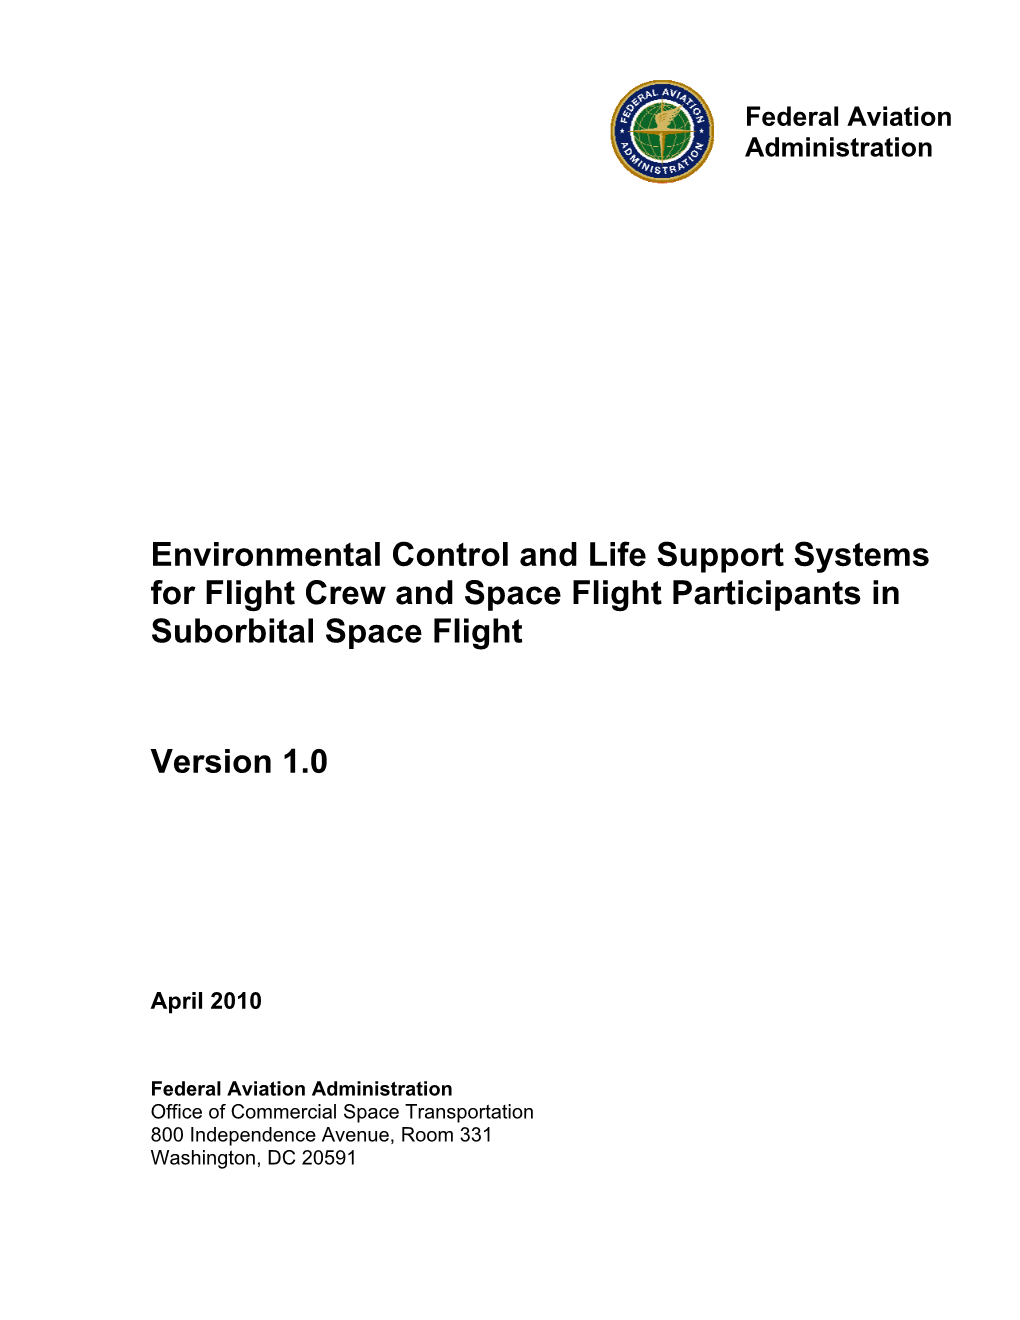 Environmental Control and Life Support Systems for Flight Crew and Space Flight Participants in Suborbital Space Flight